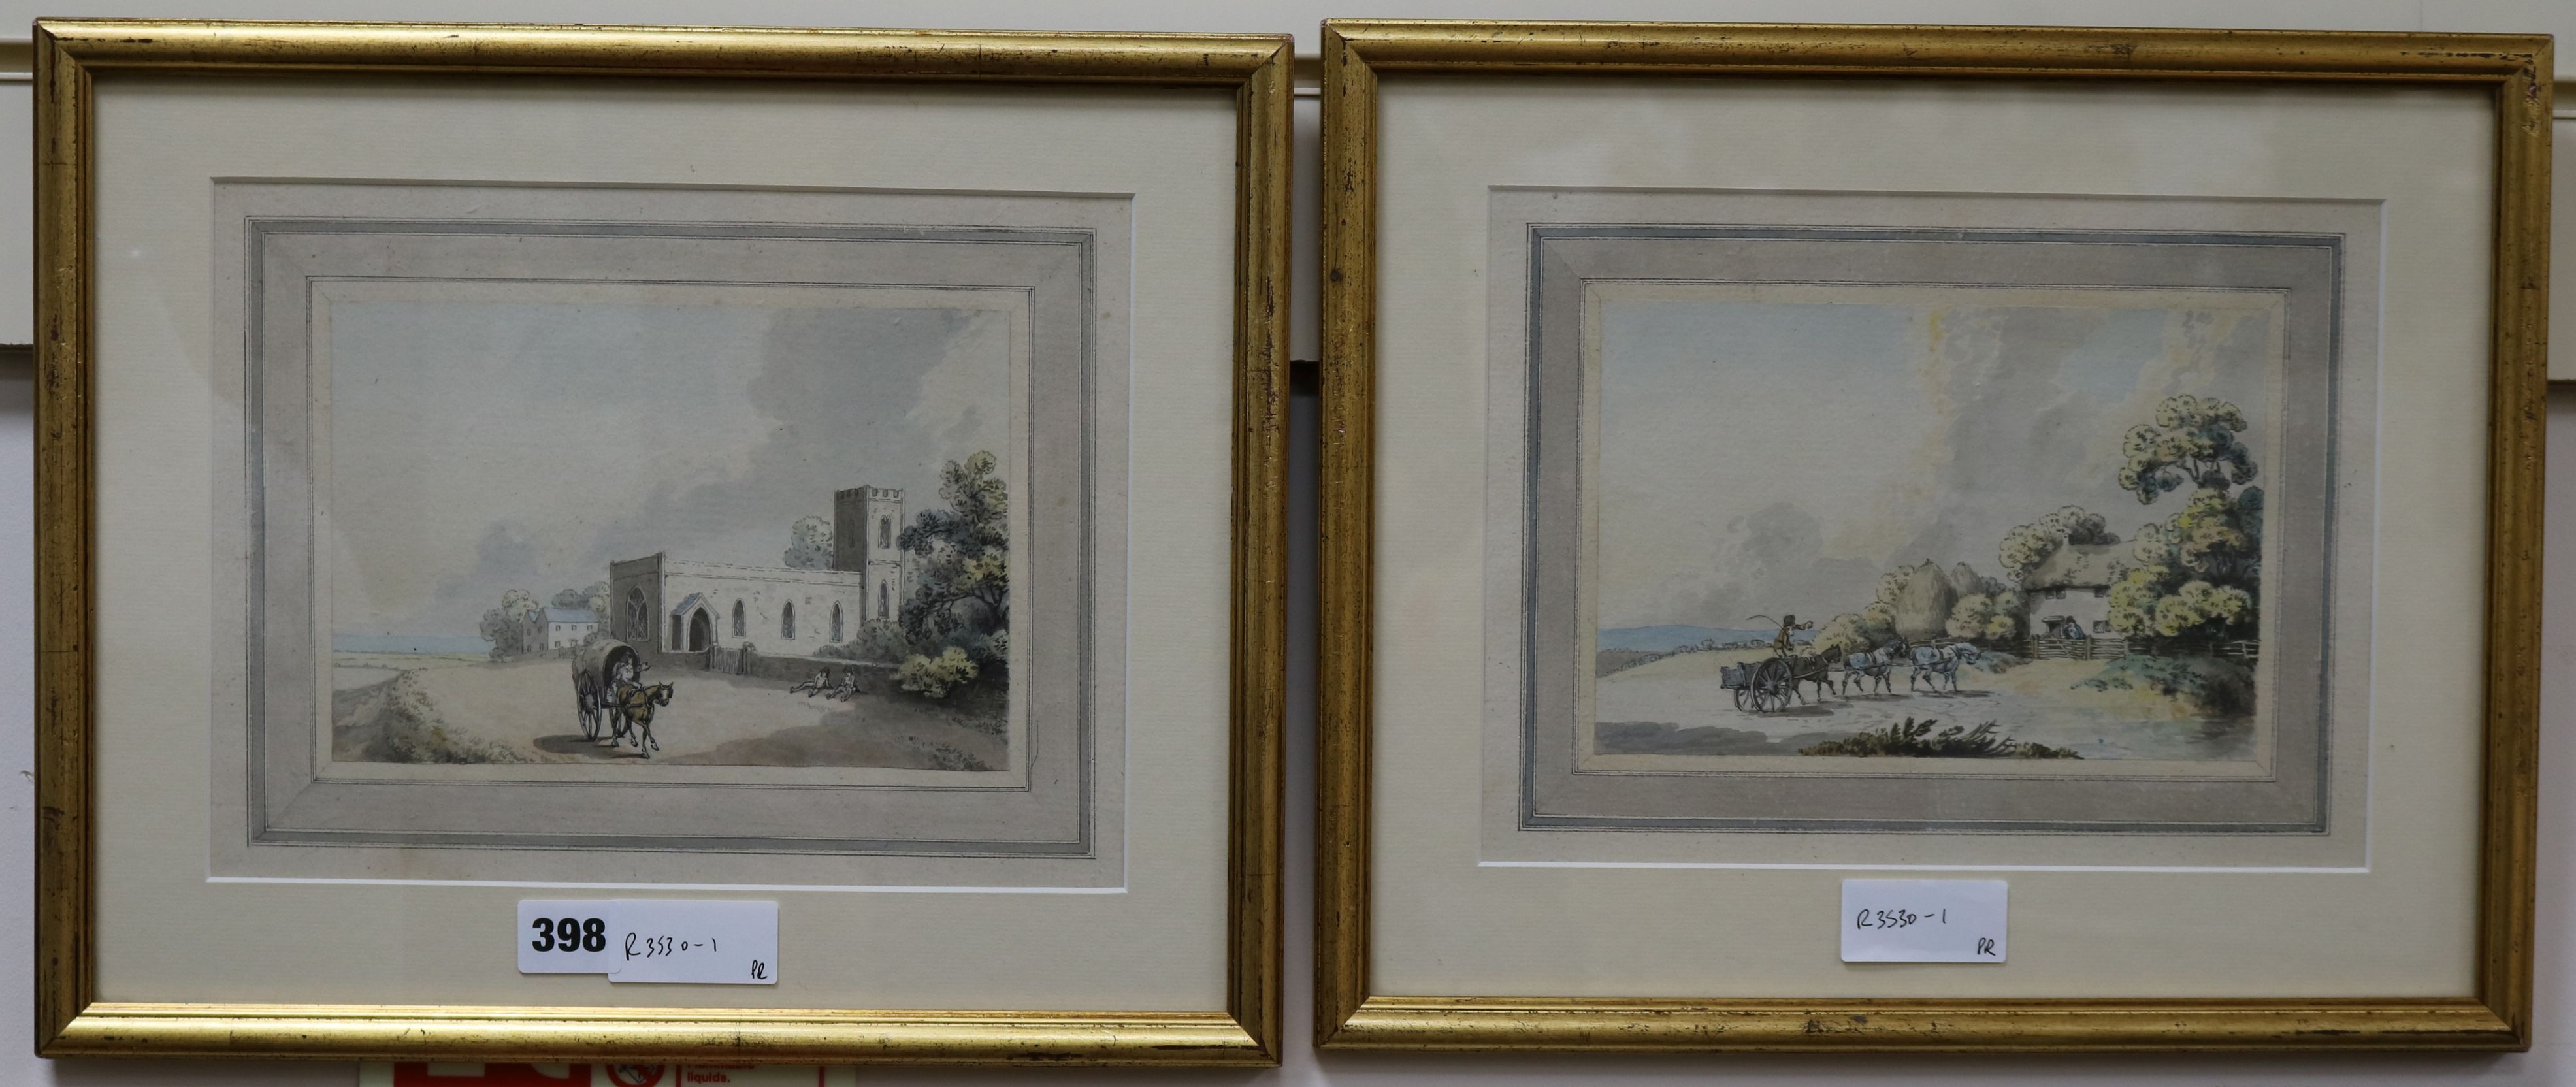 Samuel Hewittpair of ink and watercolour drawingsCarters passing a church and cottage5.5 x 8in.